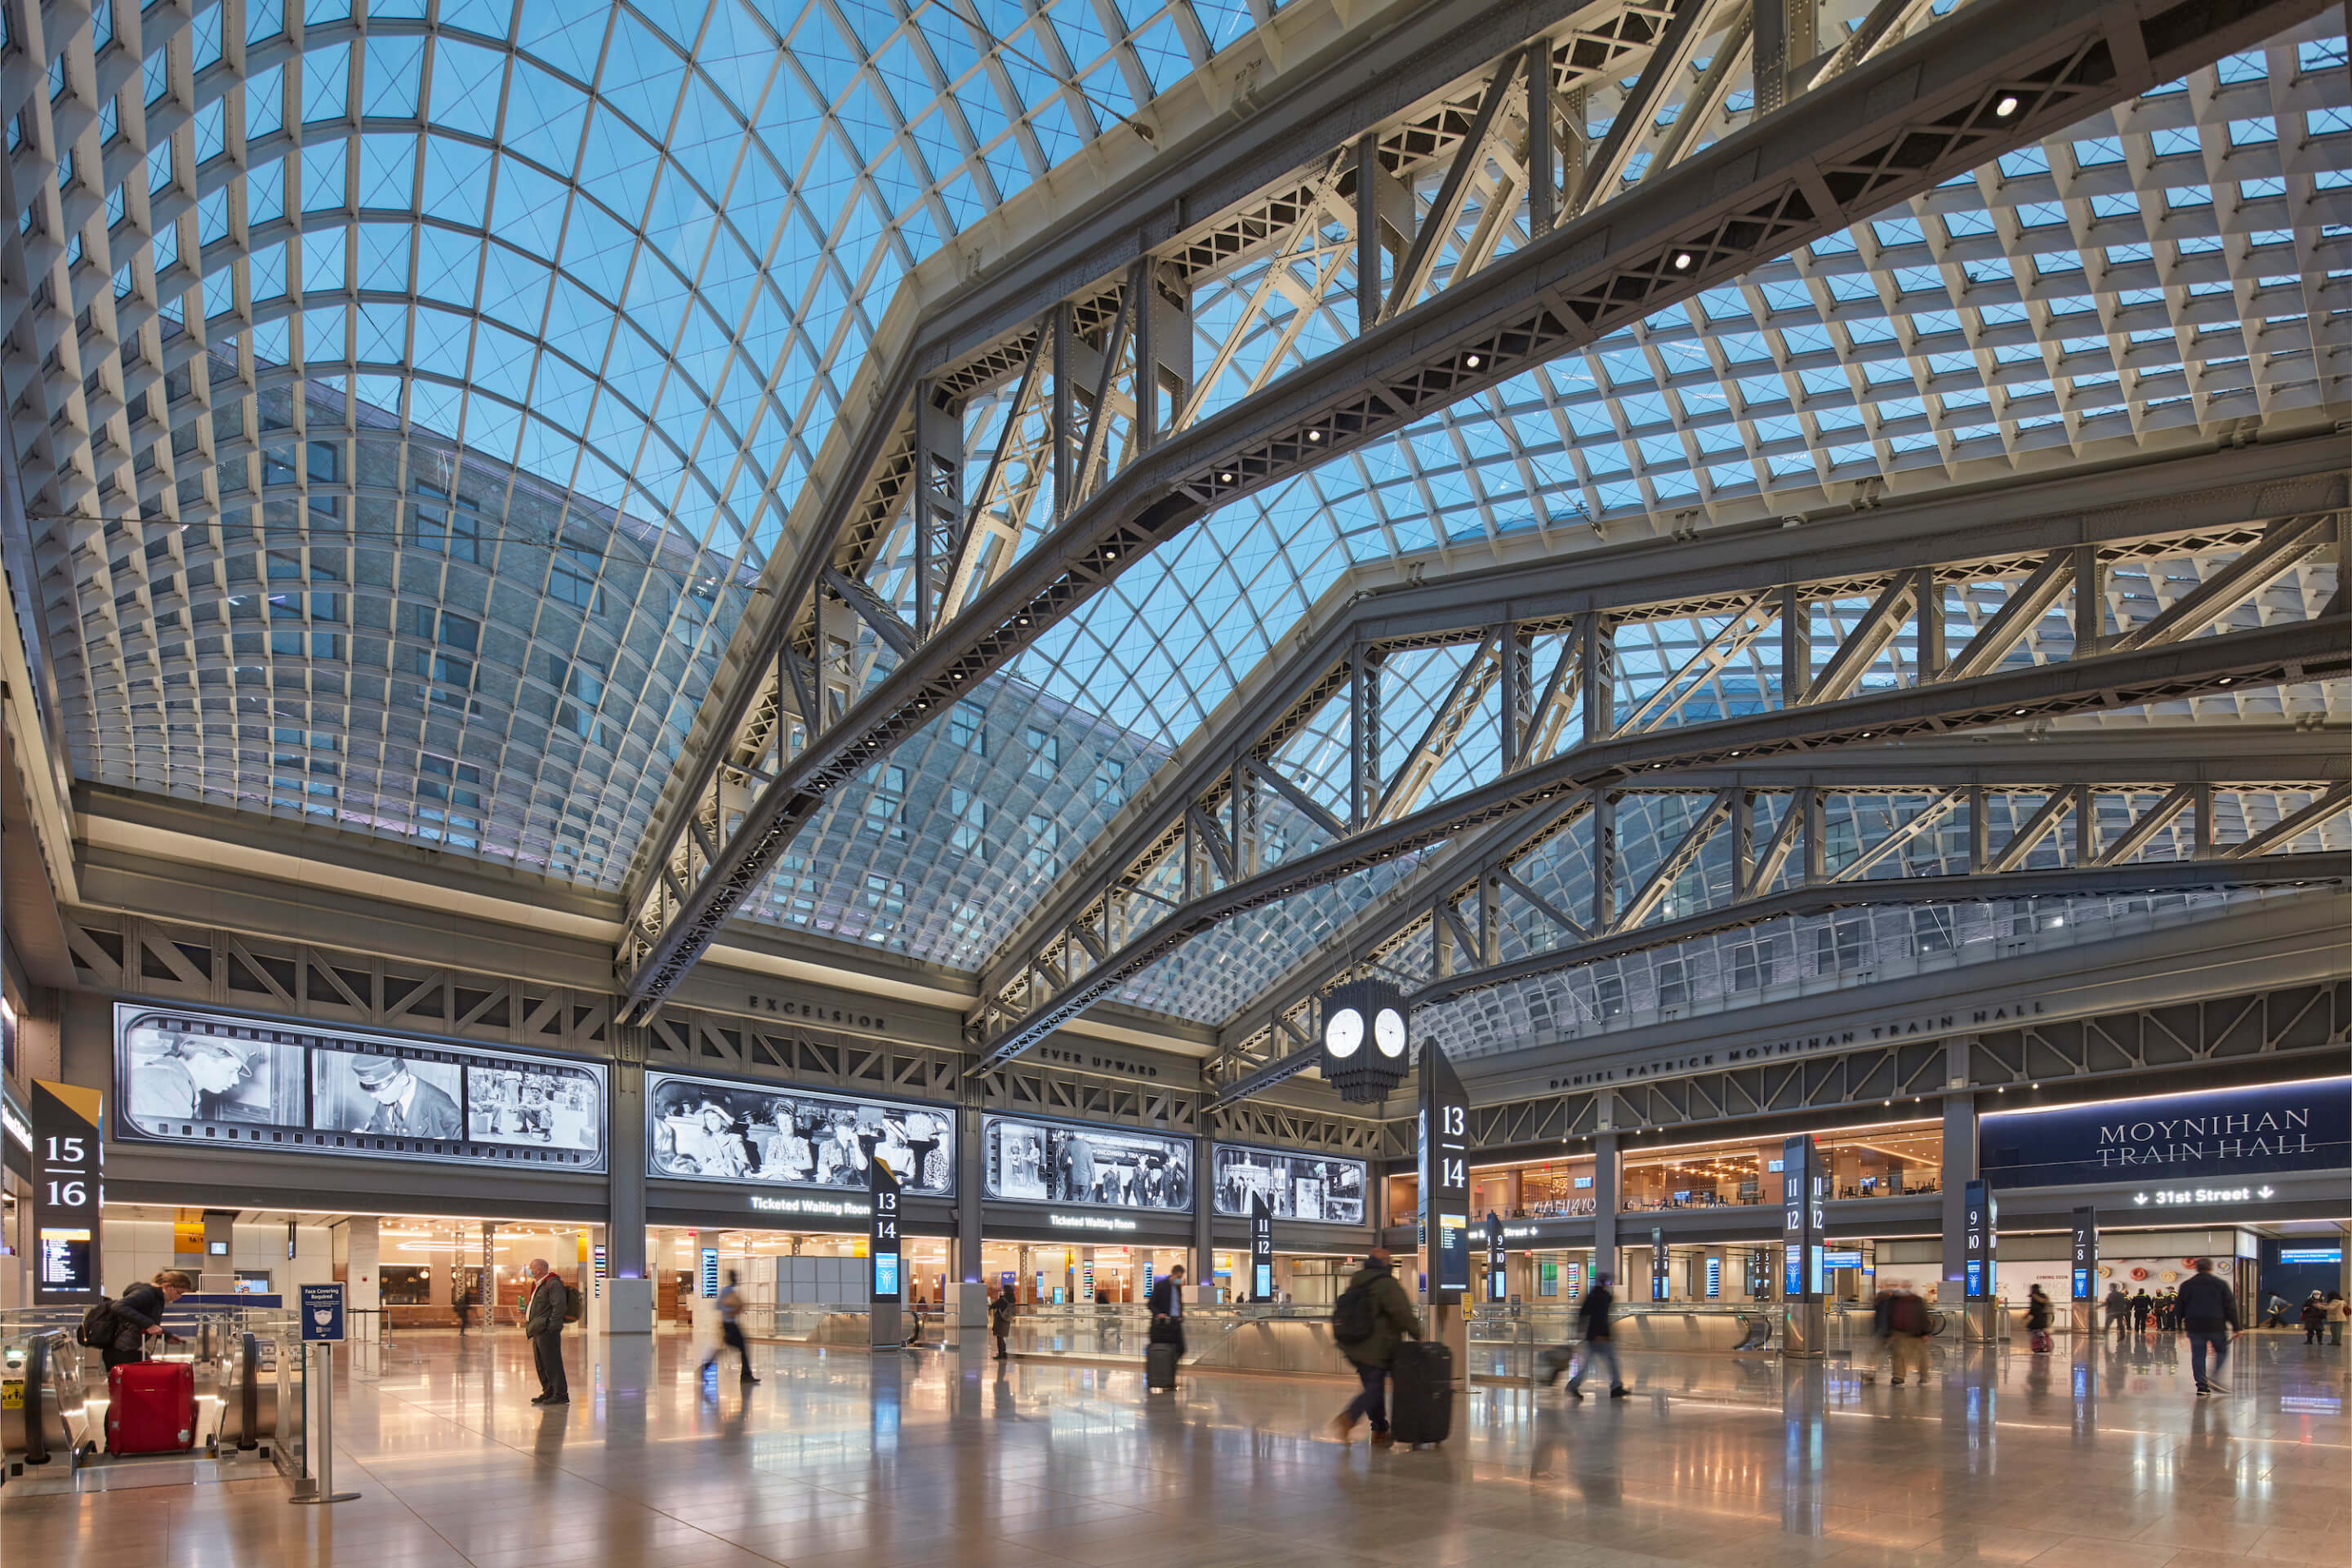 a soaring train hall with a glass ceiling